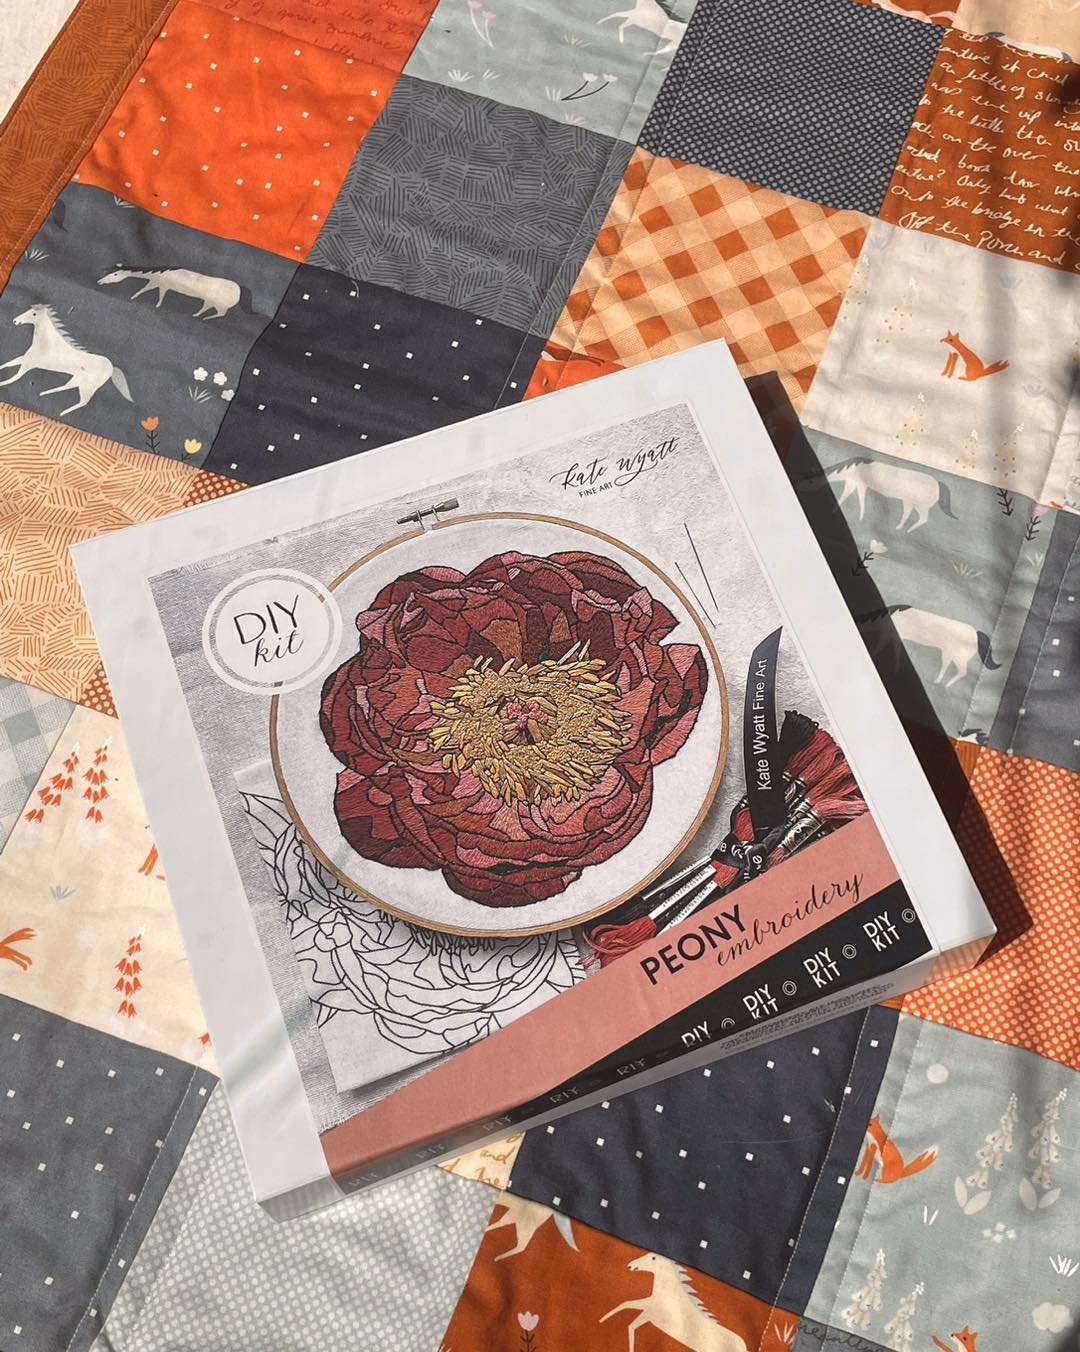 🪡✂️We just got in these amazing embroidery kits by @katewyattfineart &mdash; These kits are the perfect for sewing on the go! Improve your embroidery skills and take a chance with these intricate patterns!

✏️📲We also carry kits from different bran